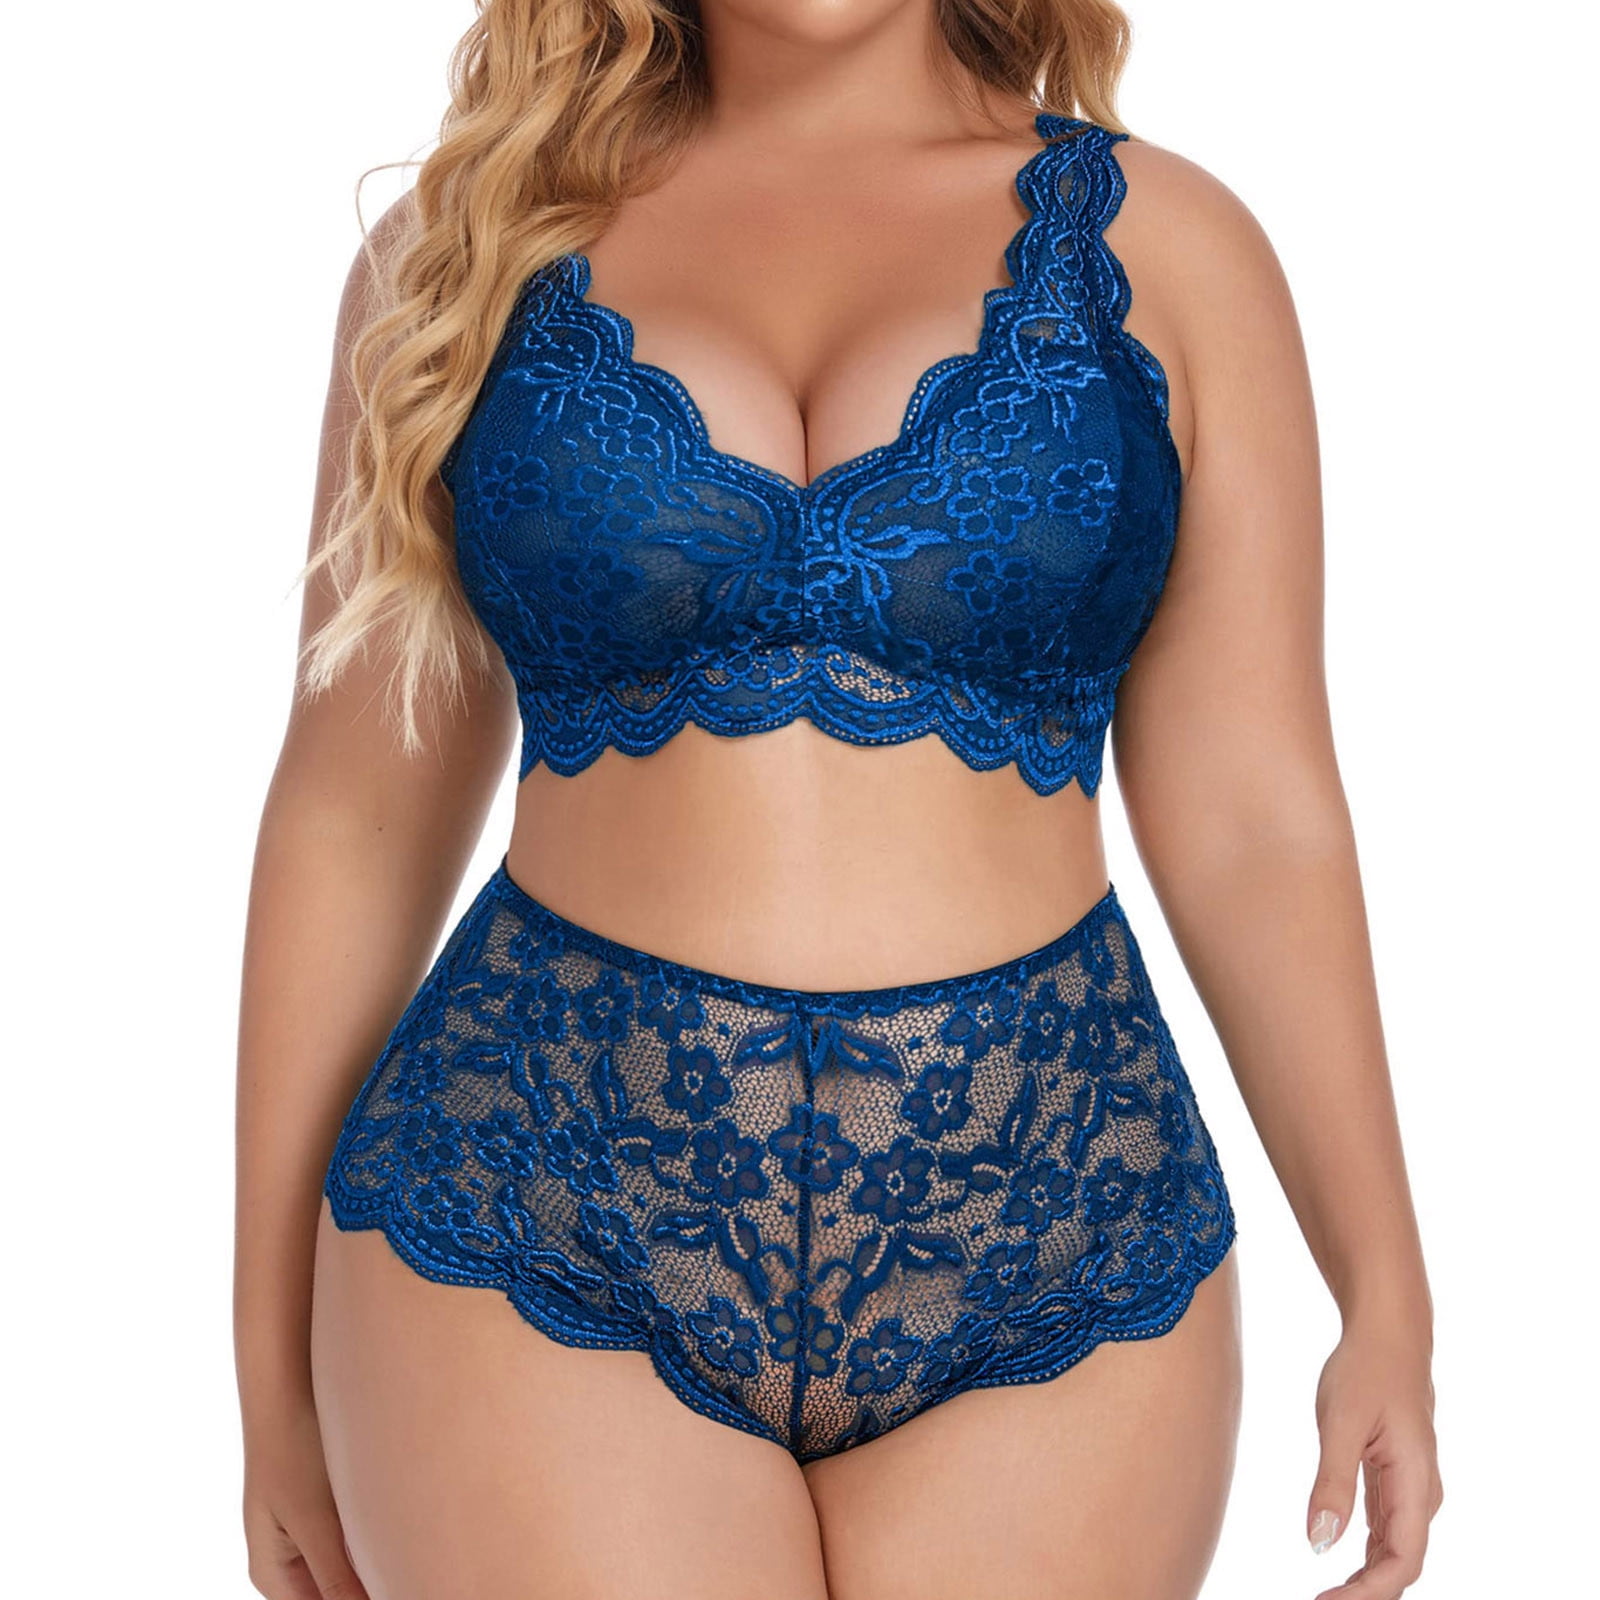 Blue Bras / Lingerie Tops: at $35.00+ over 2 products